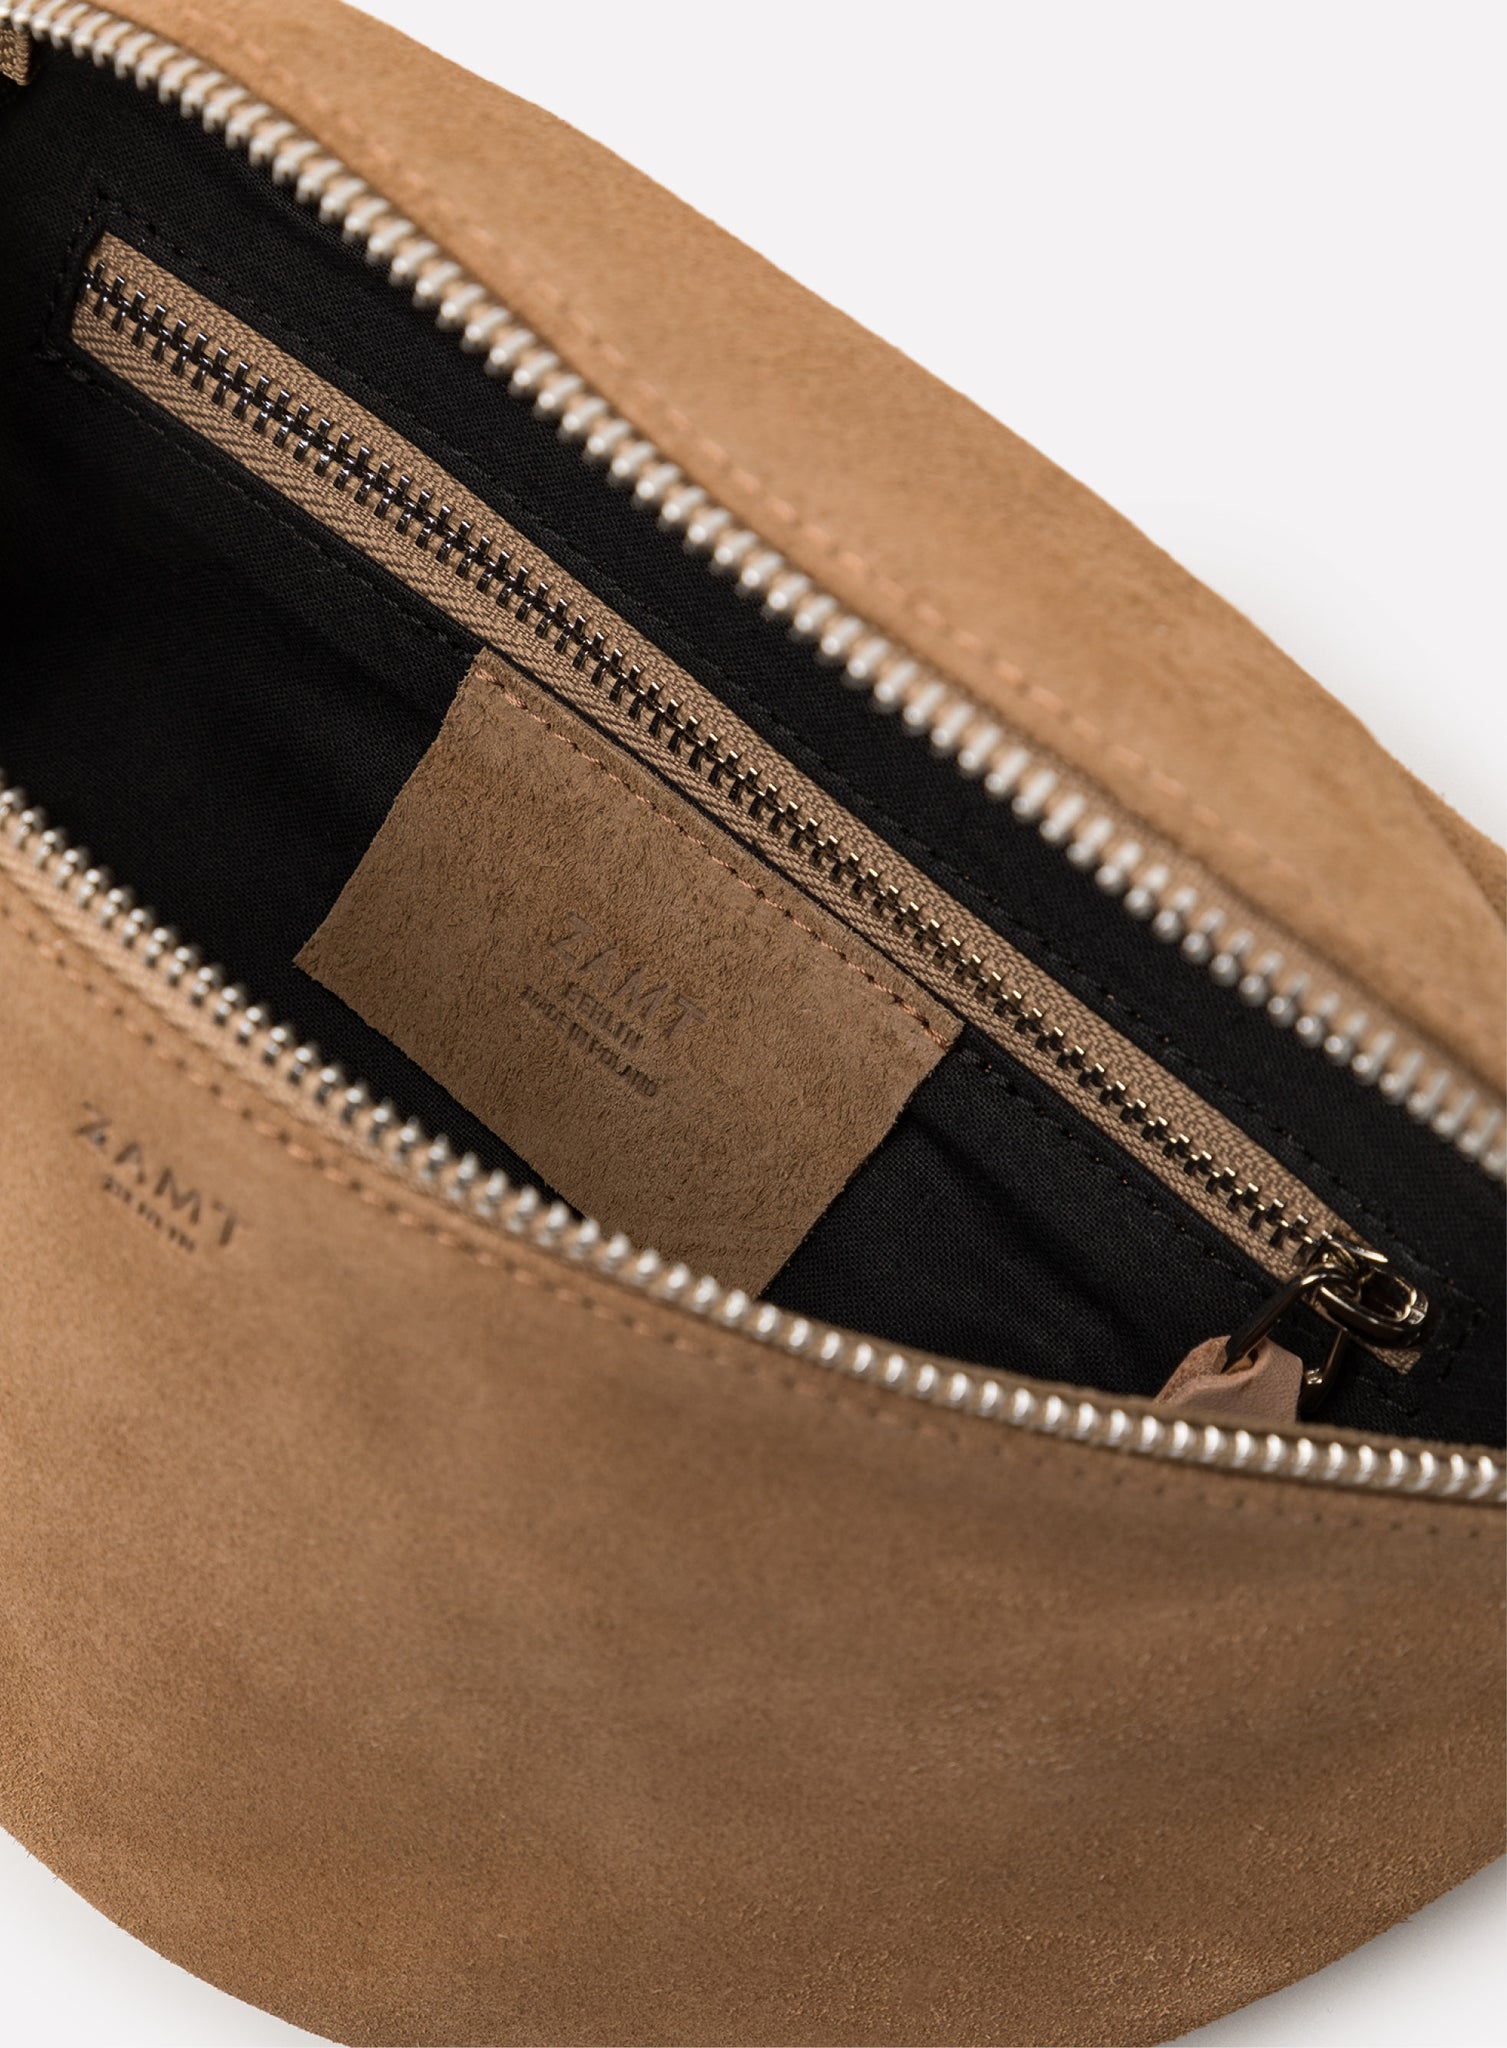 HIP BAG | CAN SUEDE SAND